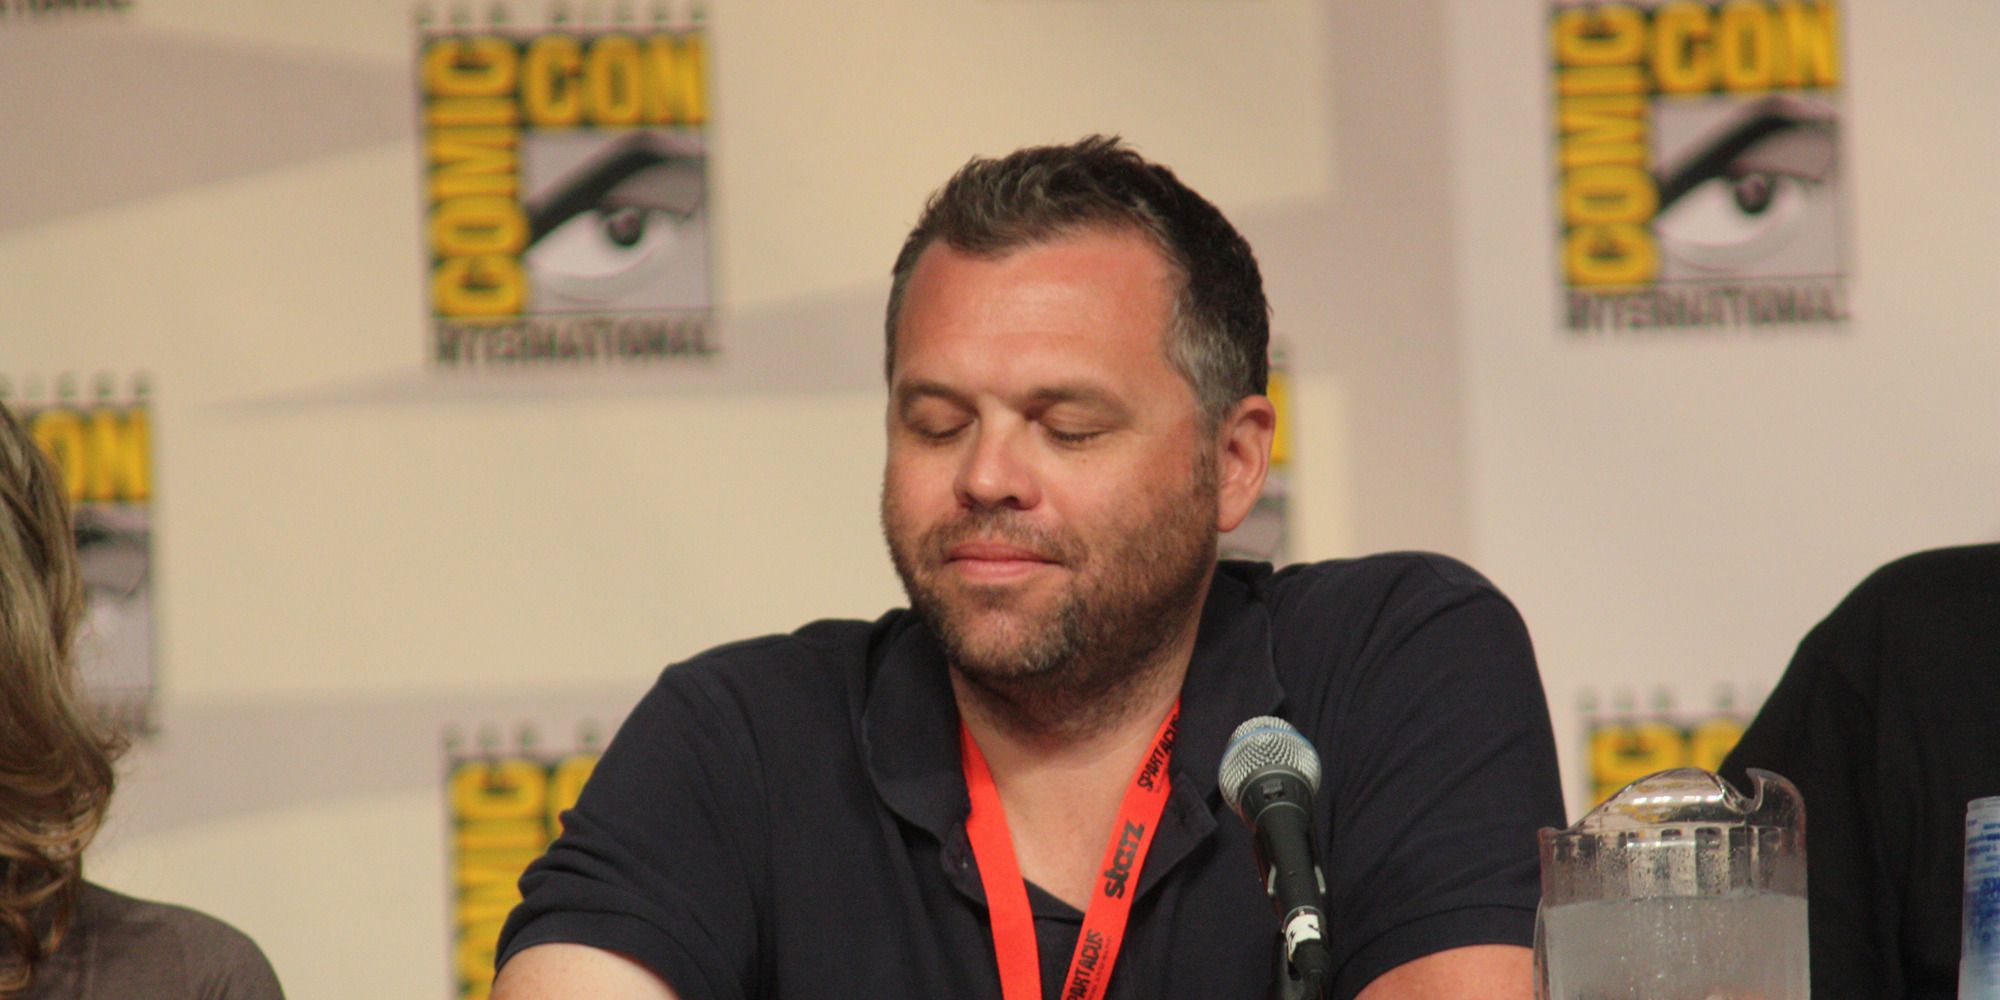 Chris McKenna with his eyes closed at a San Diego Comic Con panel